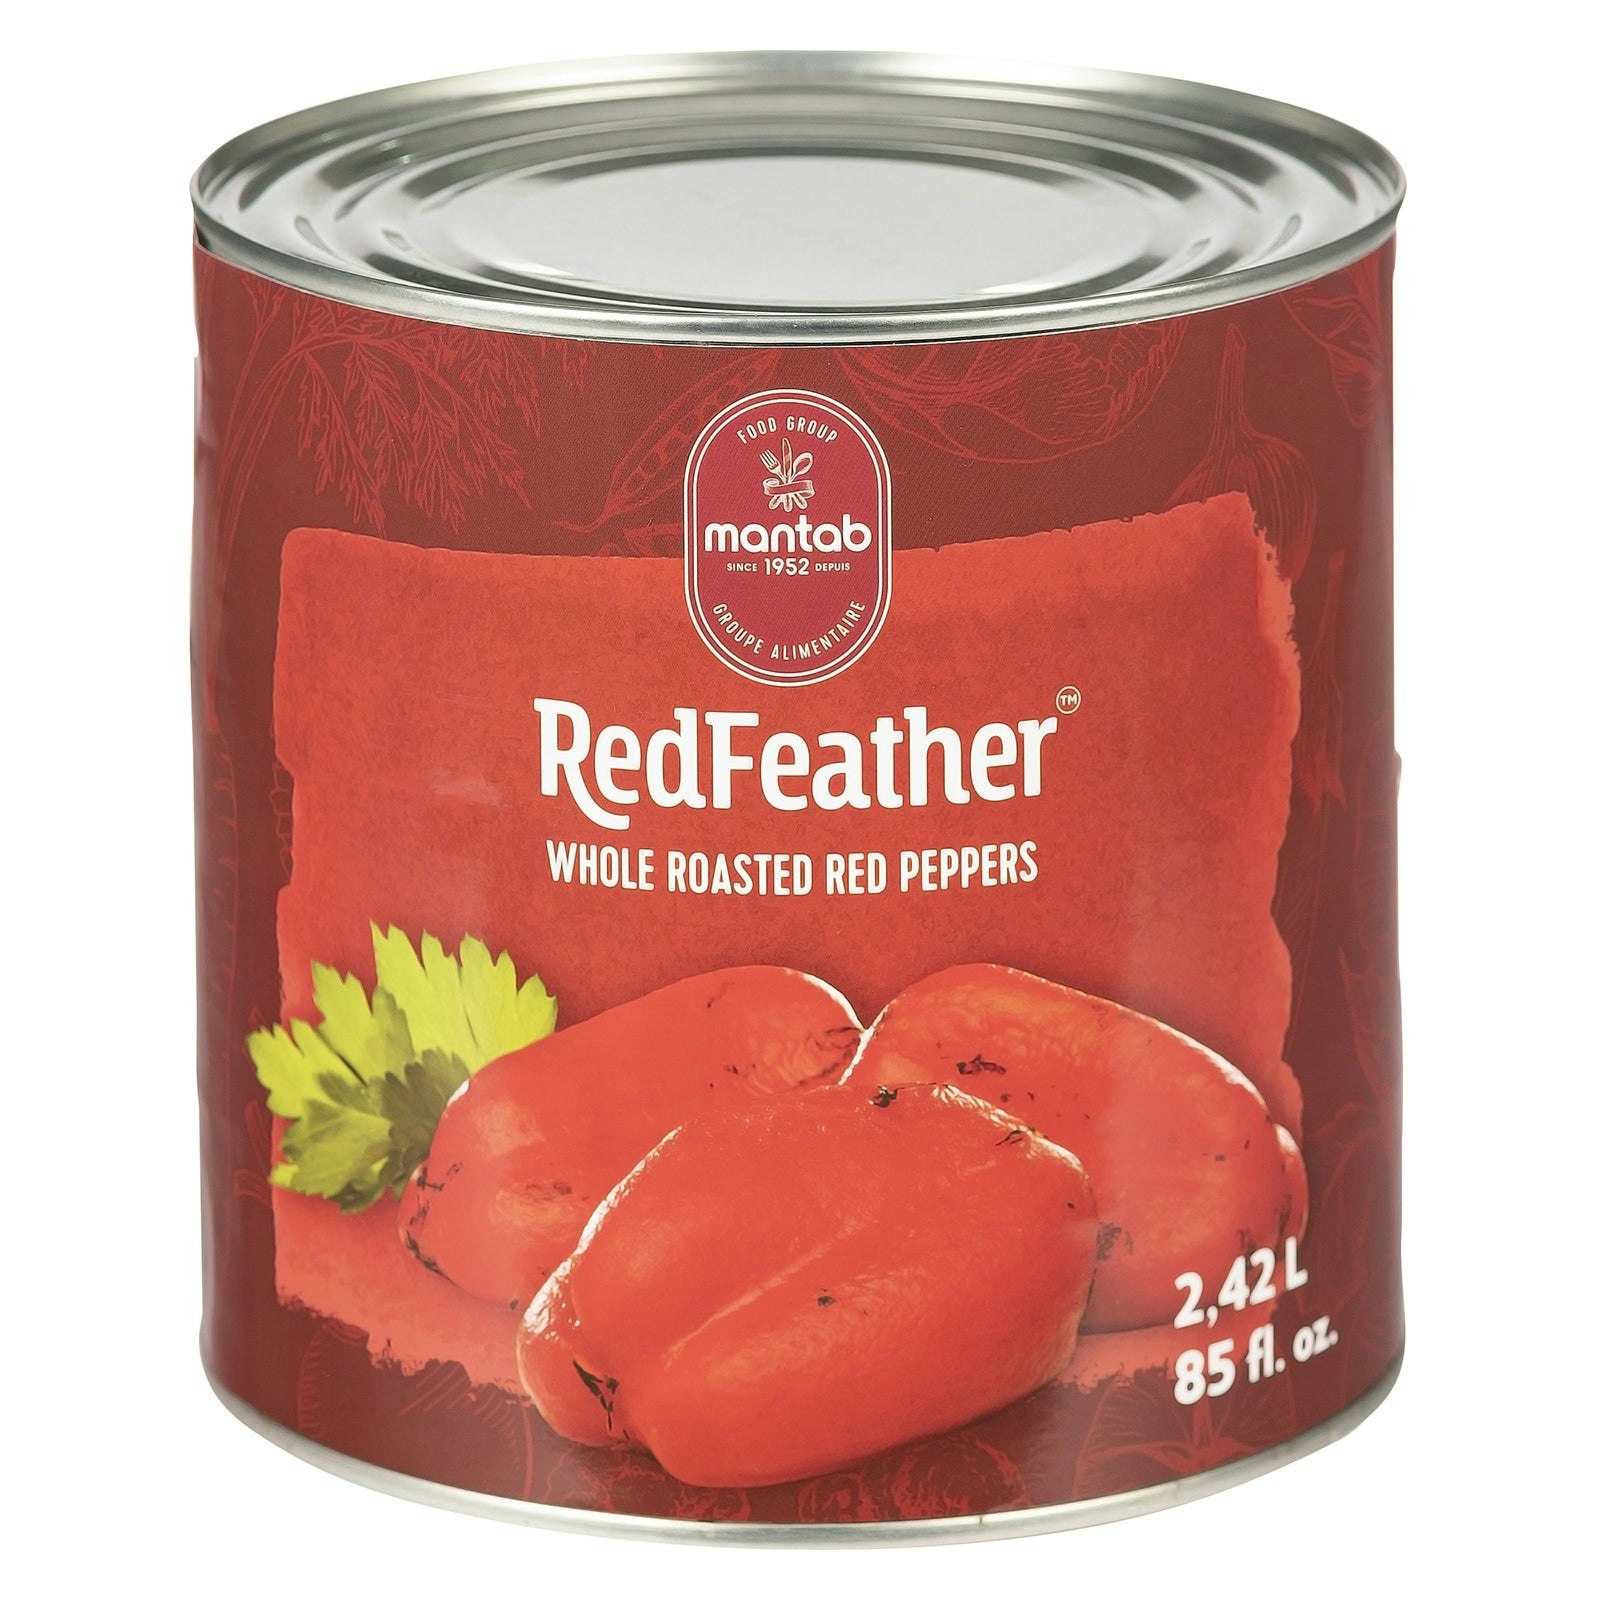 RED FEATHER Whole roasted red peppers